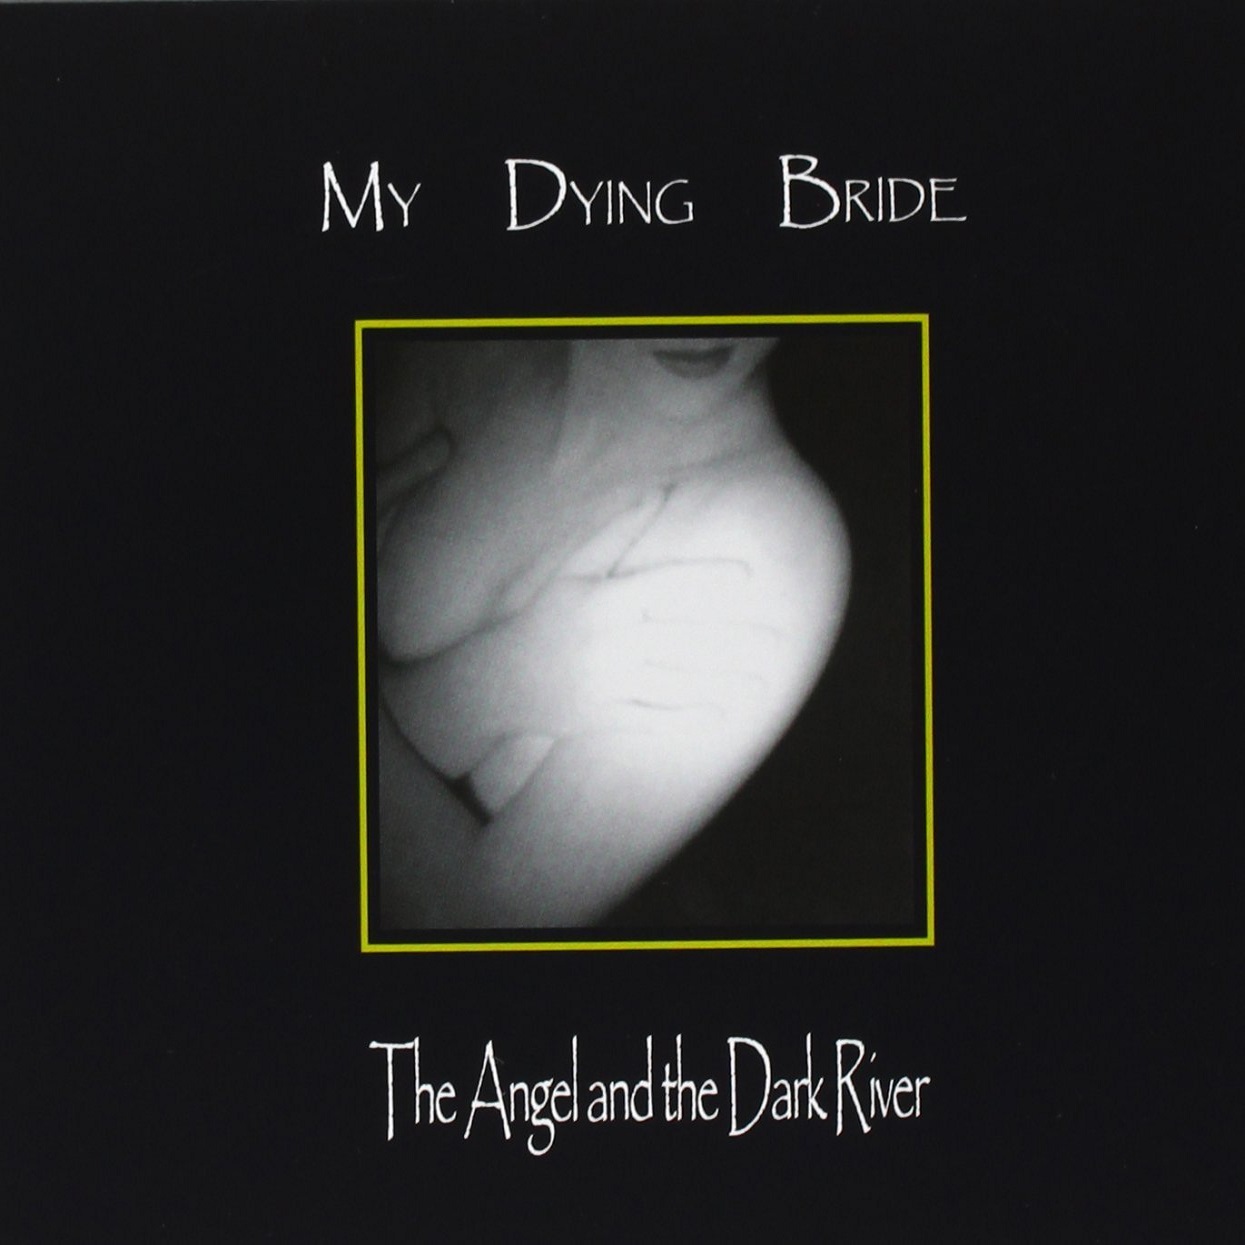 My-Dying-Bride-The-Angel-and-the-Dark-River-01a.jpg